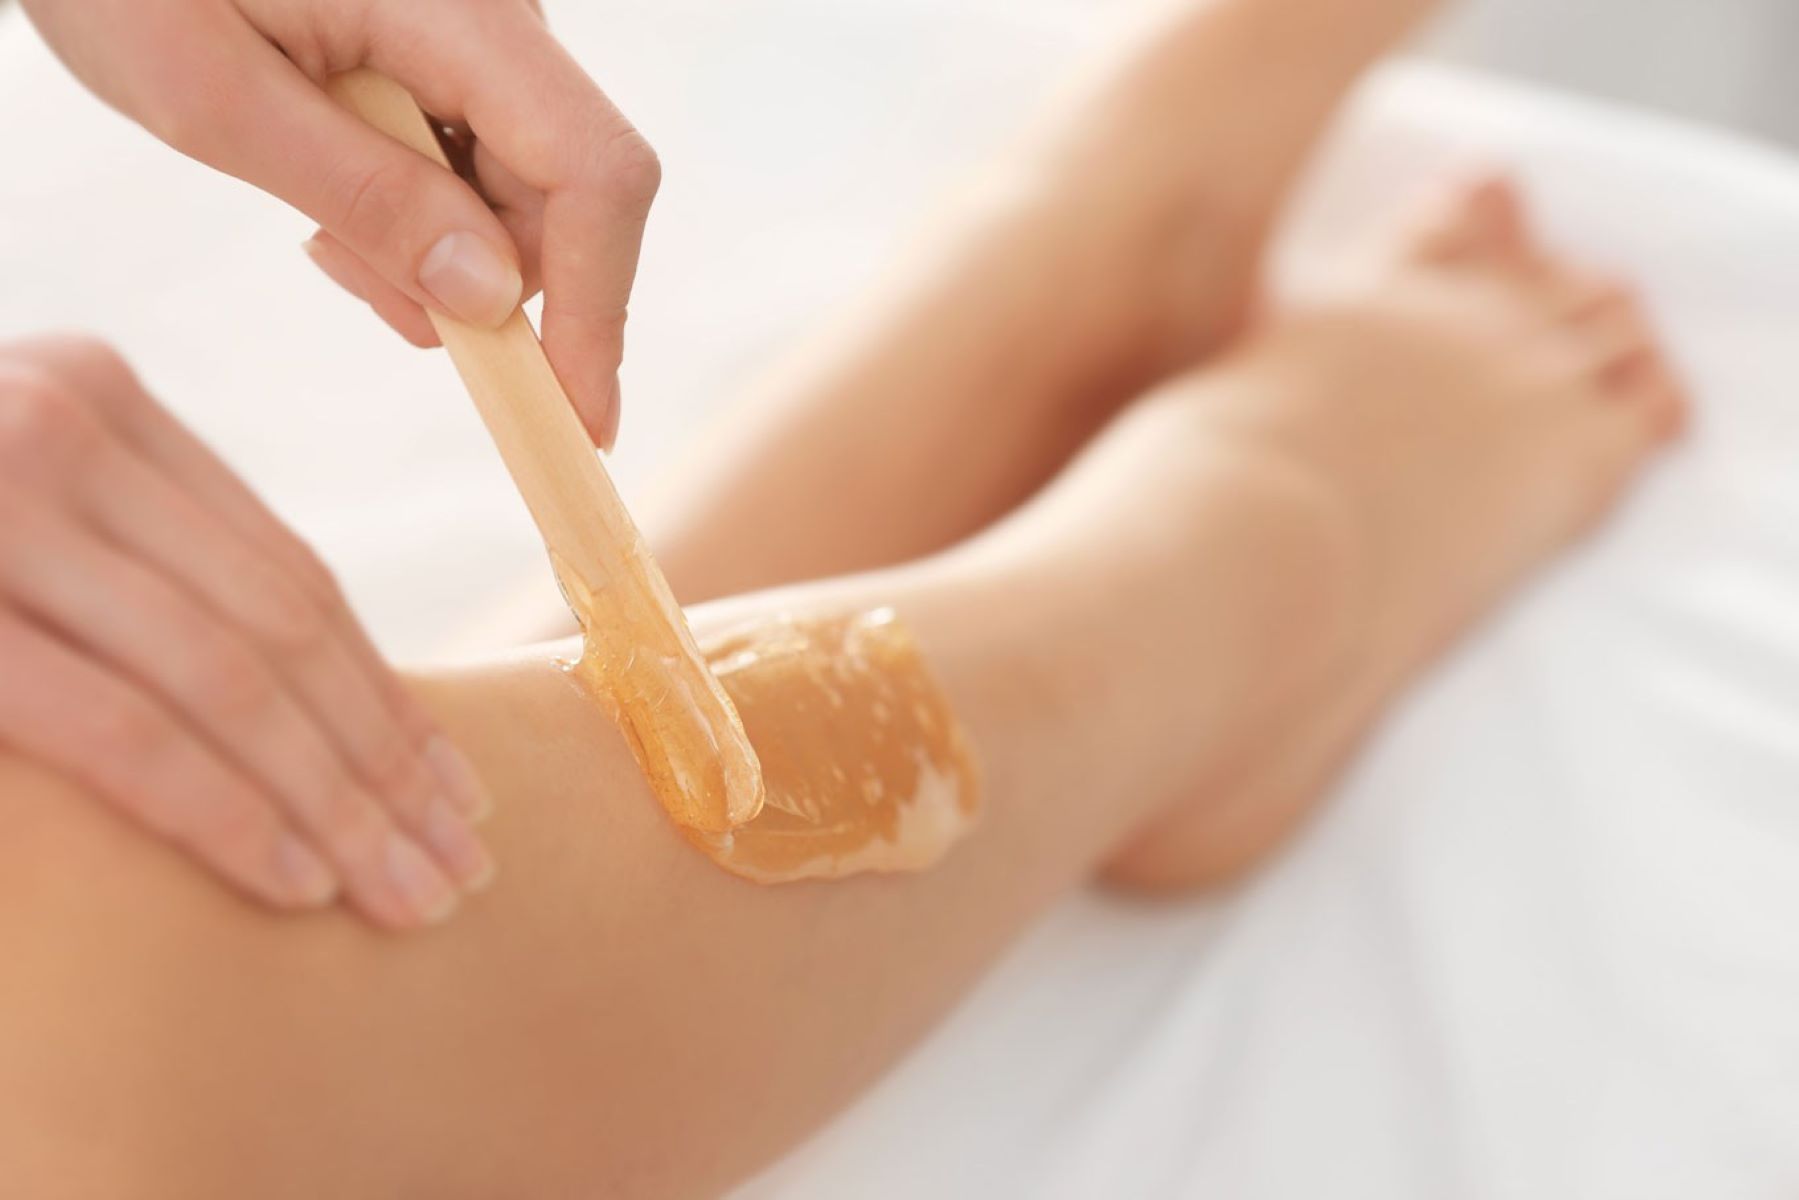 Men’s Surprising Request After Waxing: You Won’t Believe What They Ask For!